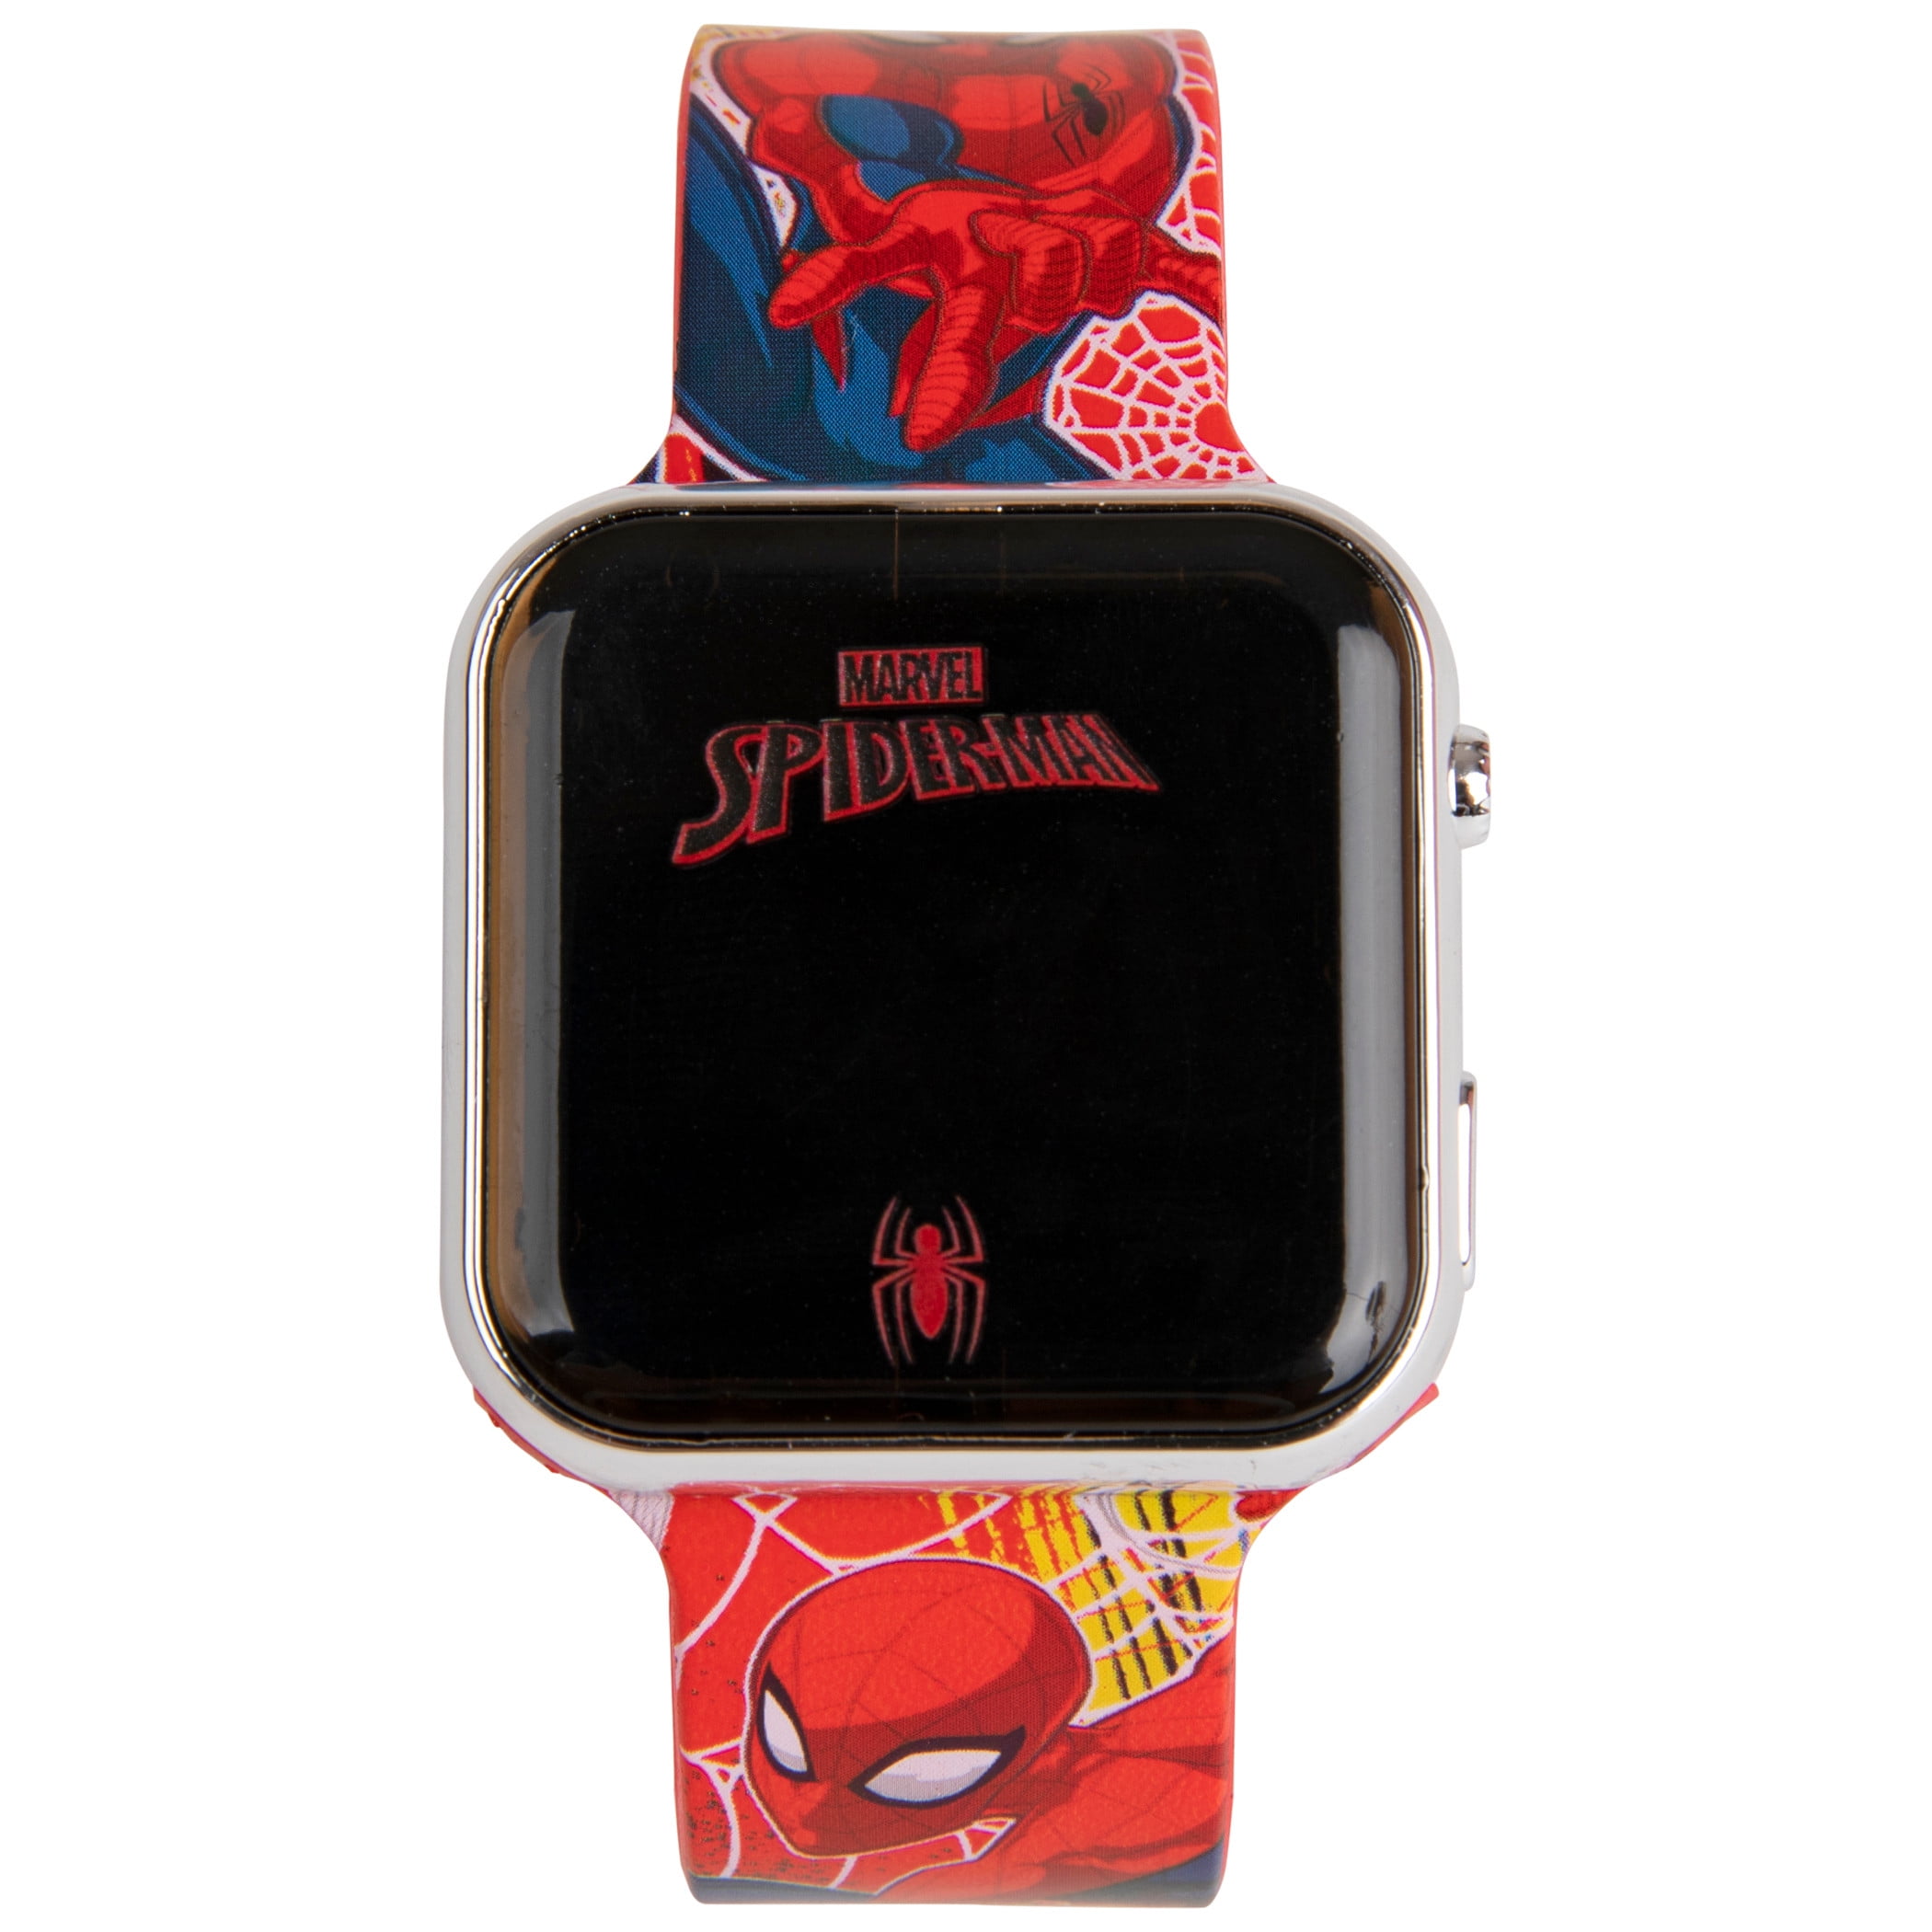 Marvel Comics Spider-Man Digital Watch w/ Character Pose Rubber Strap ...